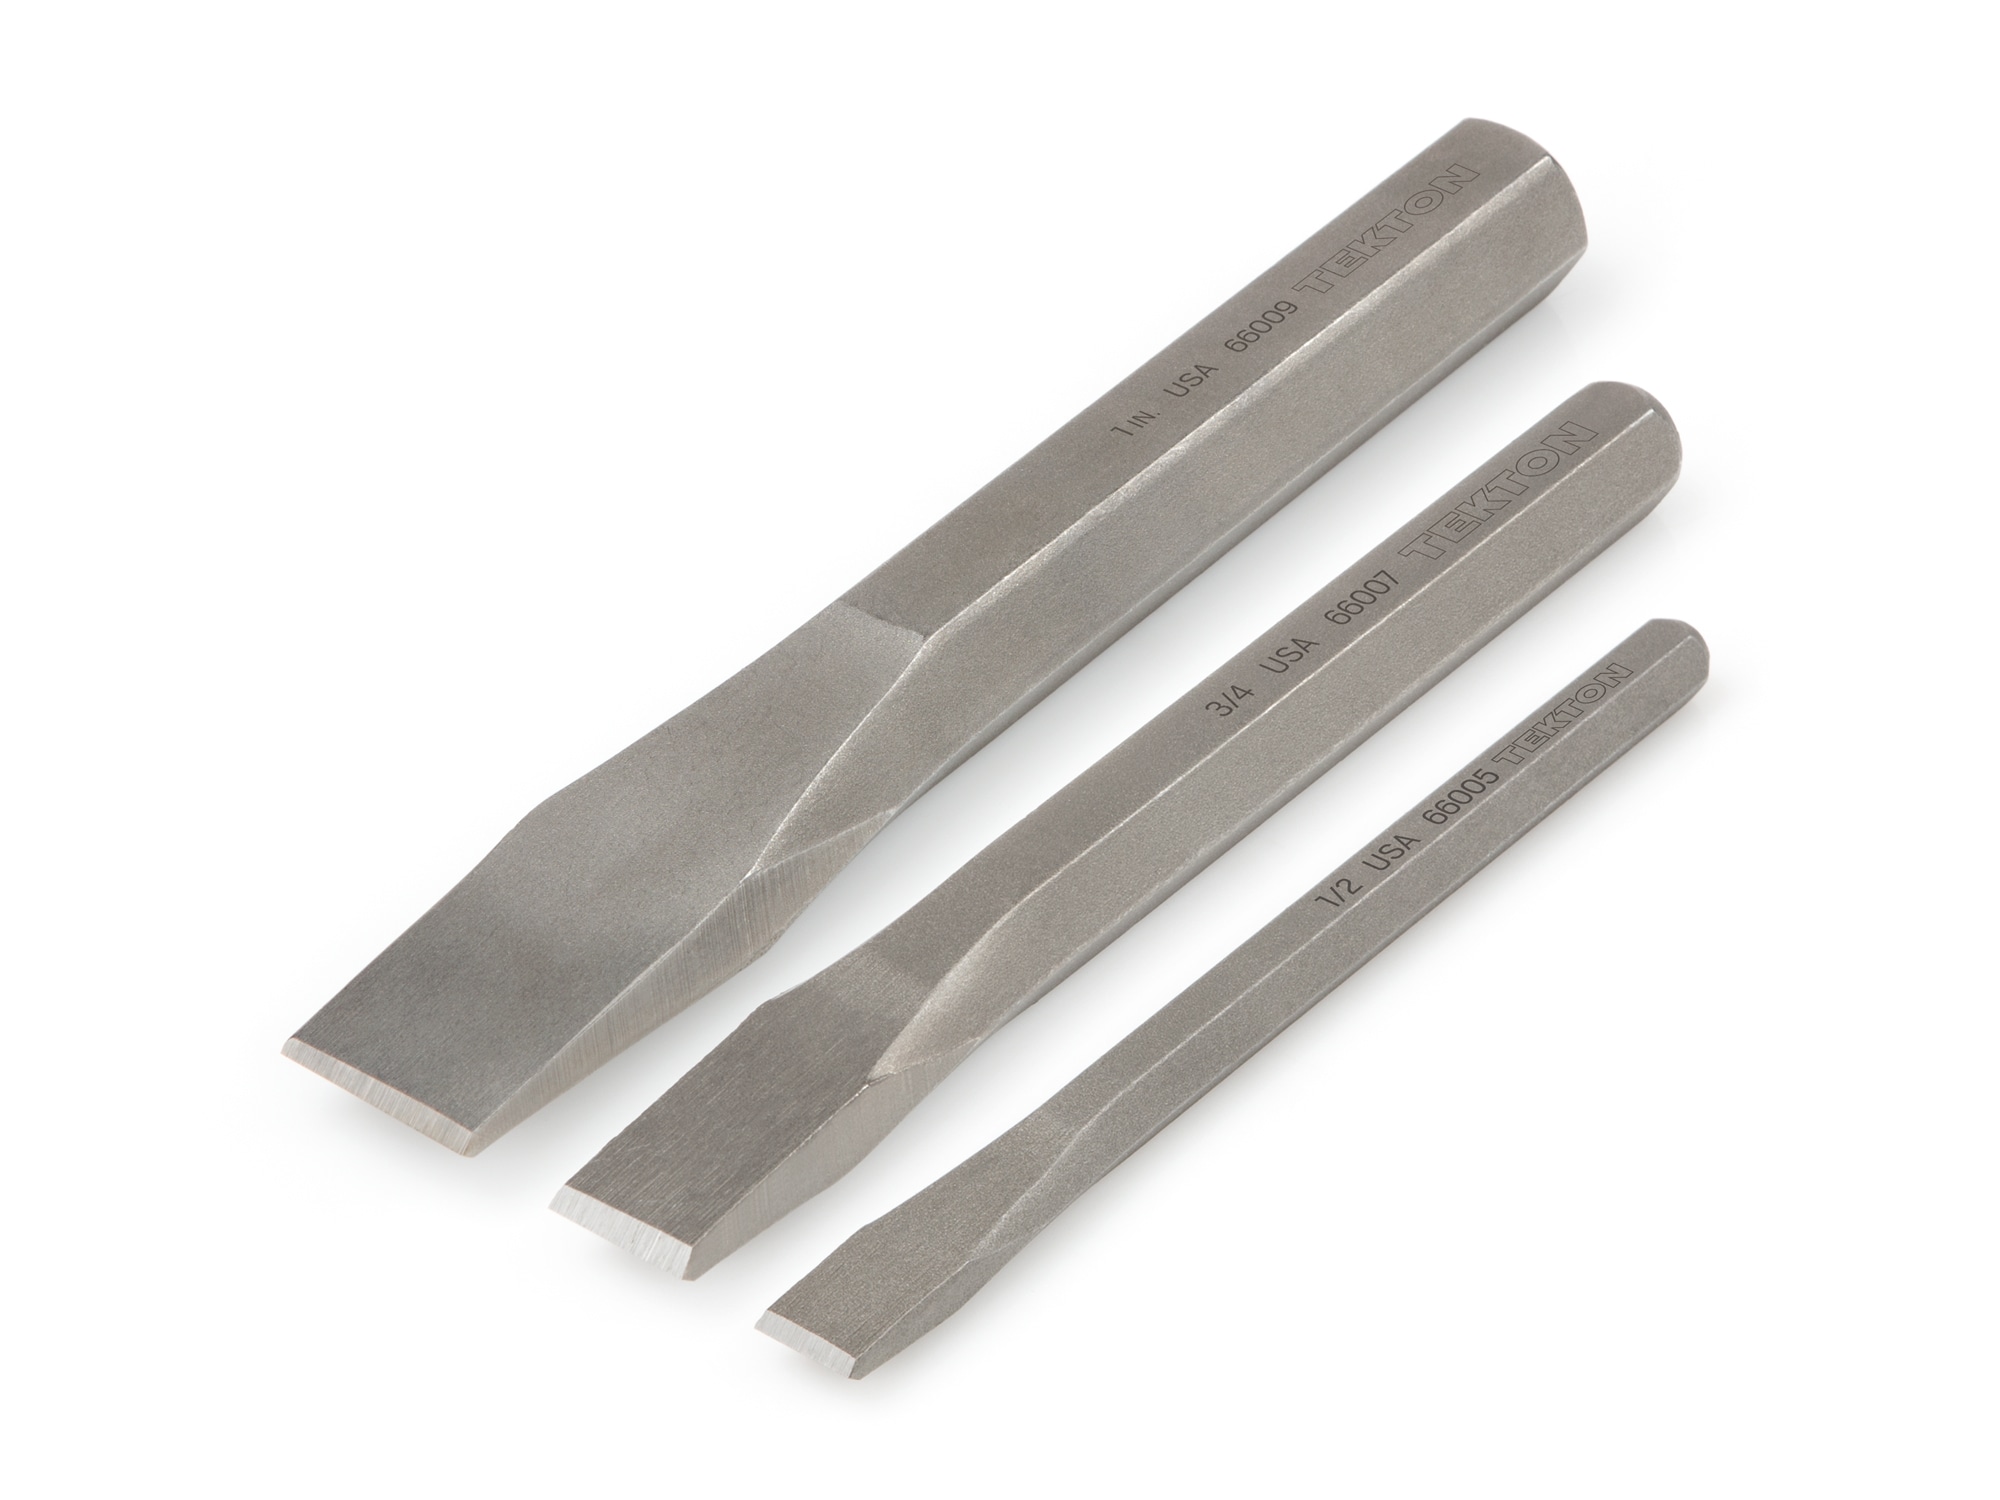 Gray Chisel Sets at Lowes.com